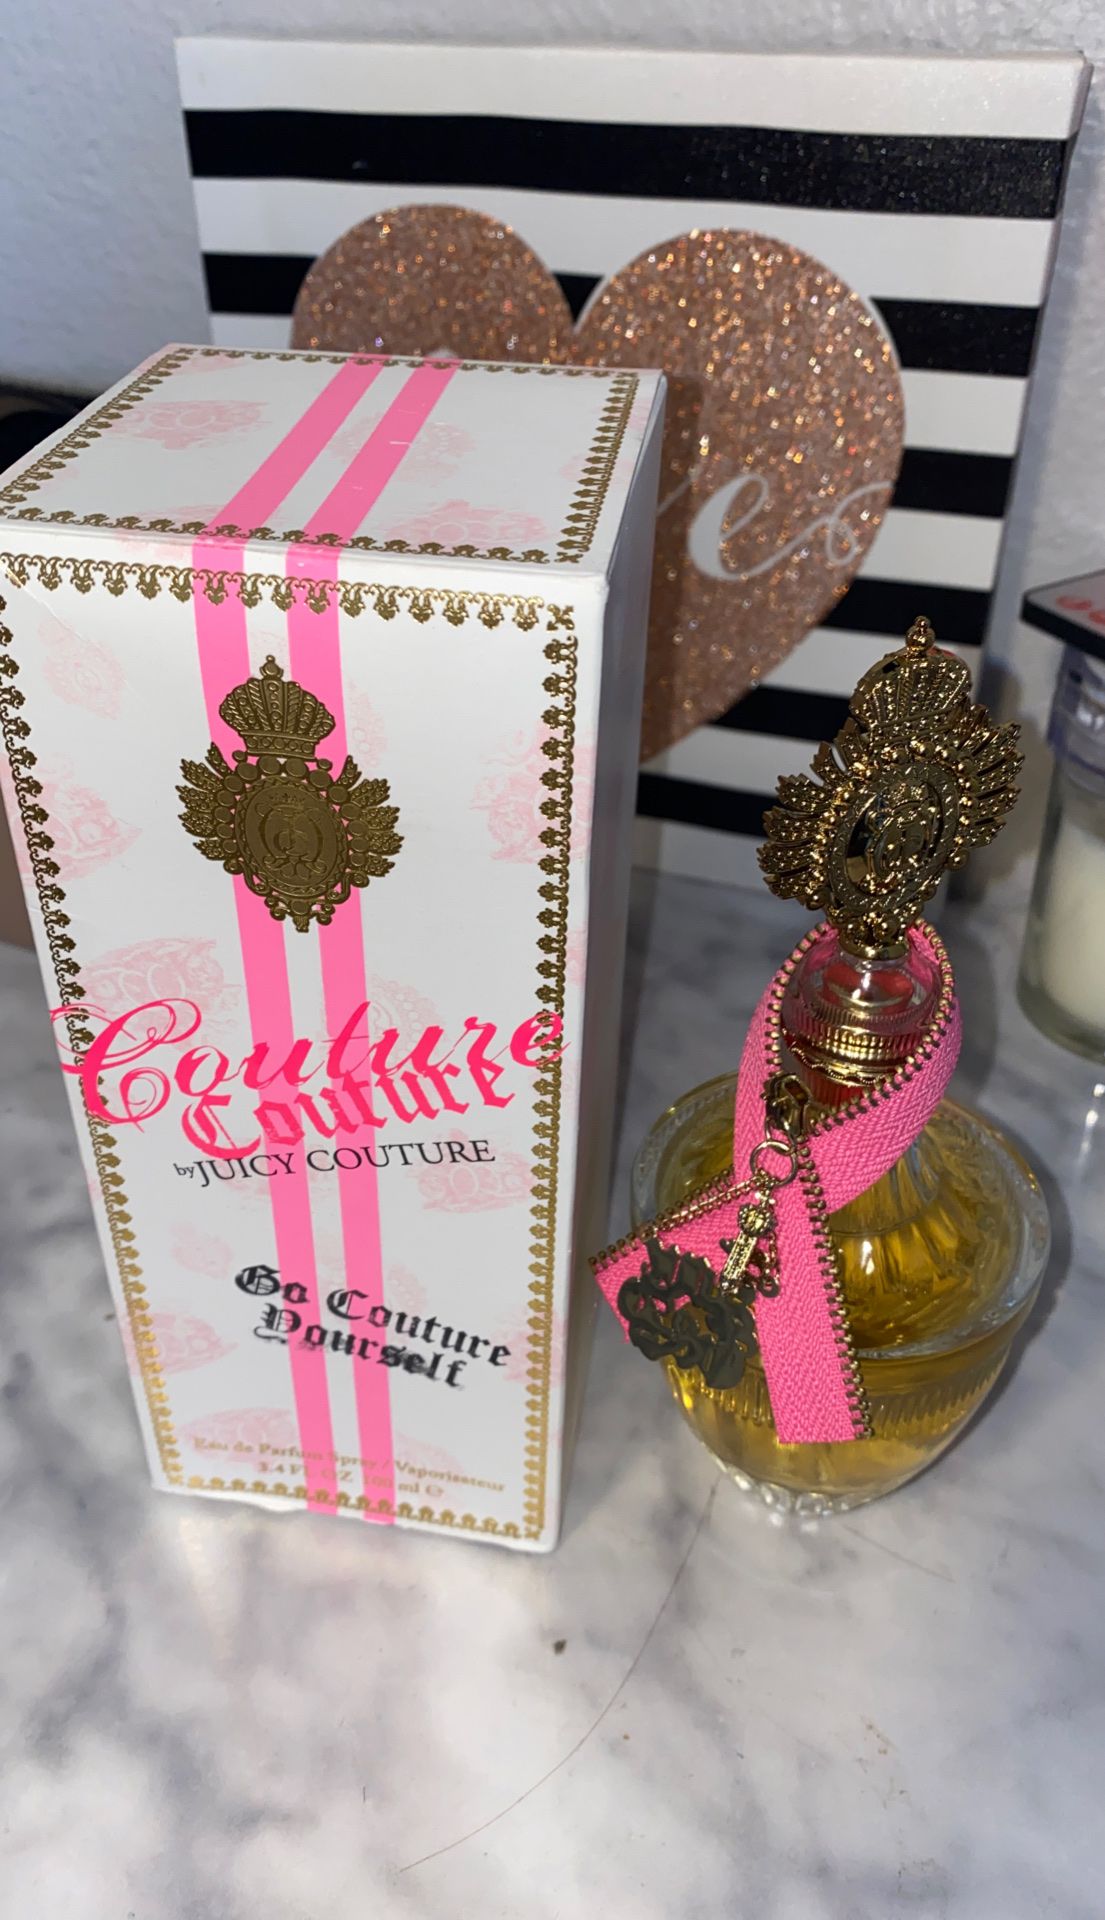 Brand new juicy couture perfume